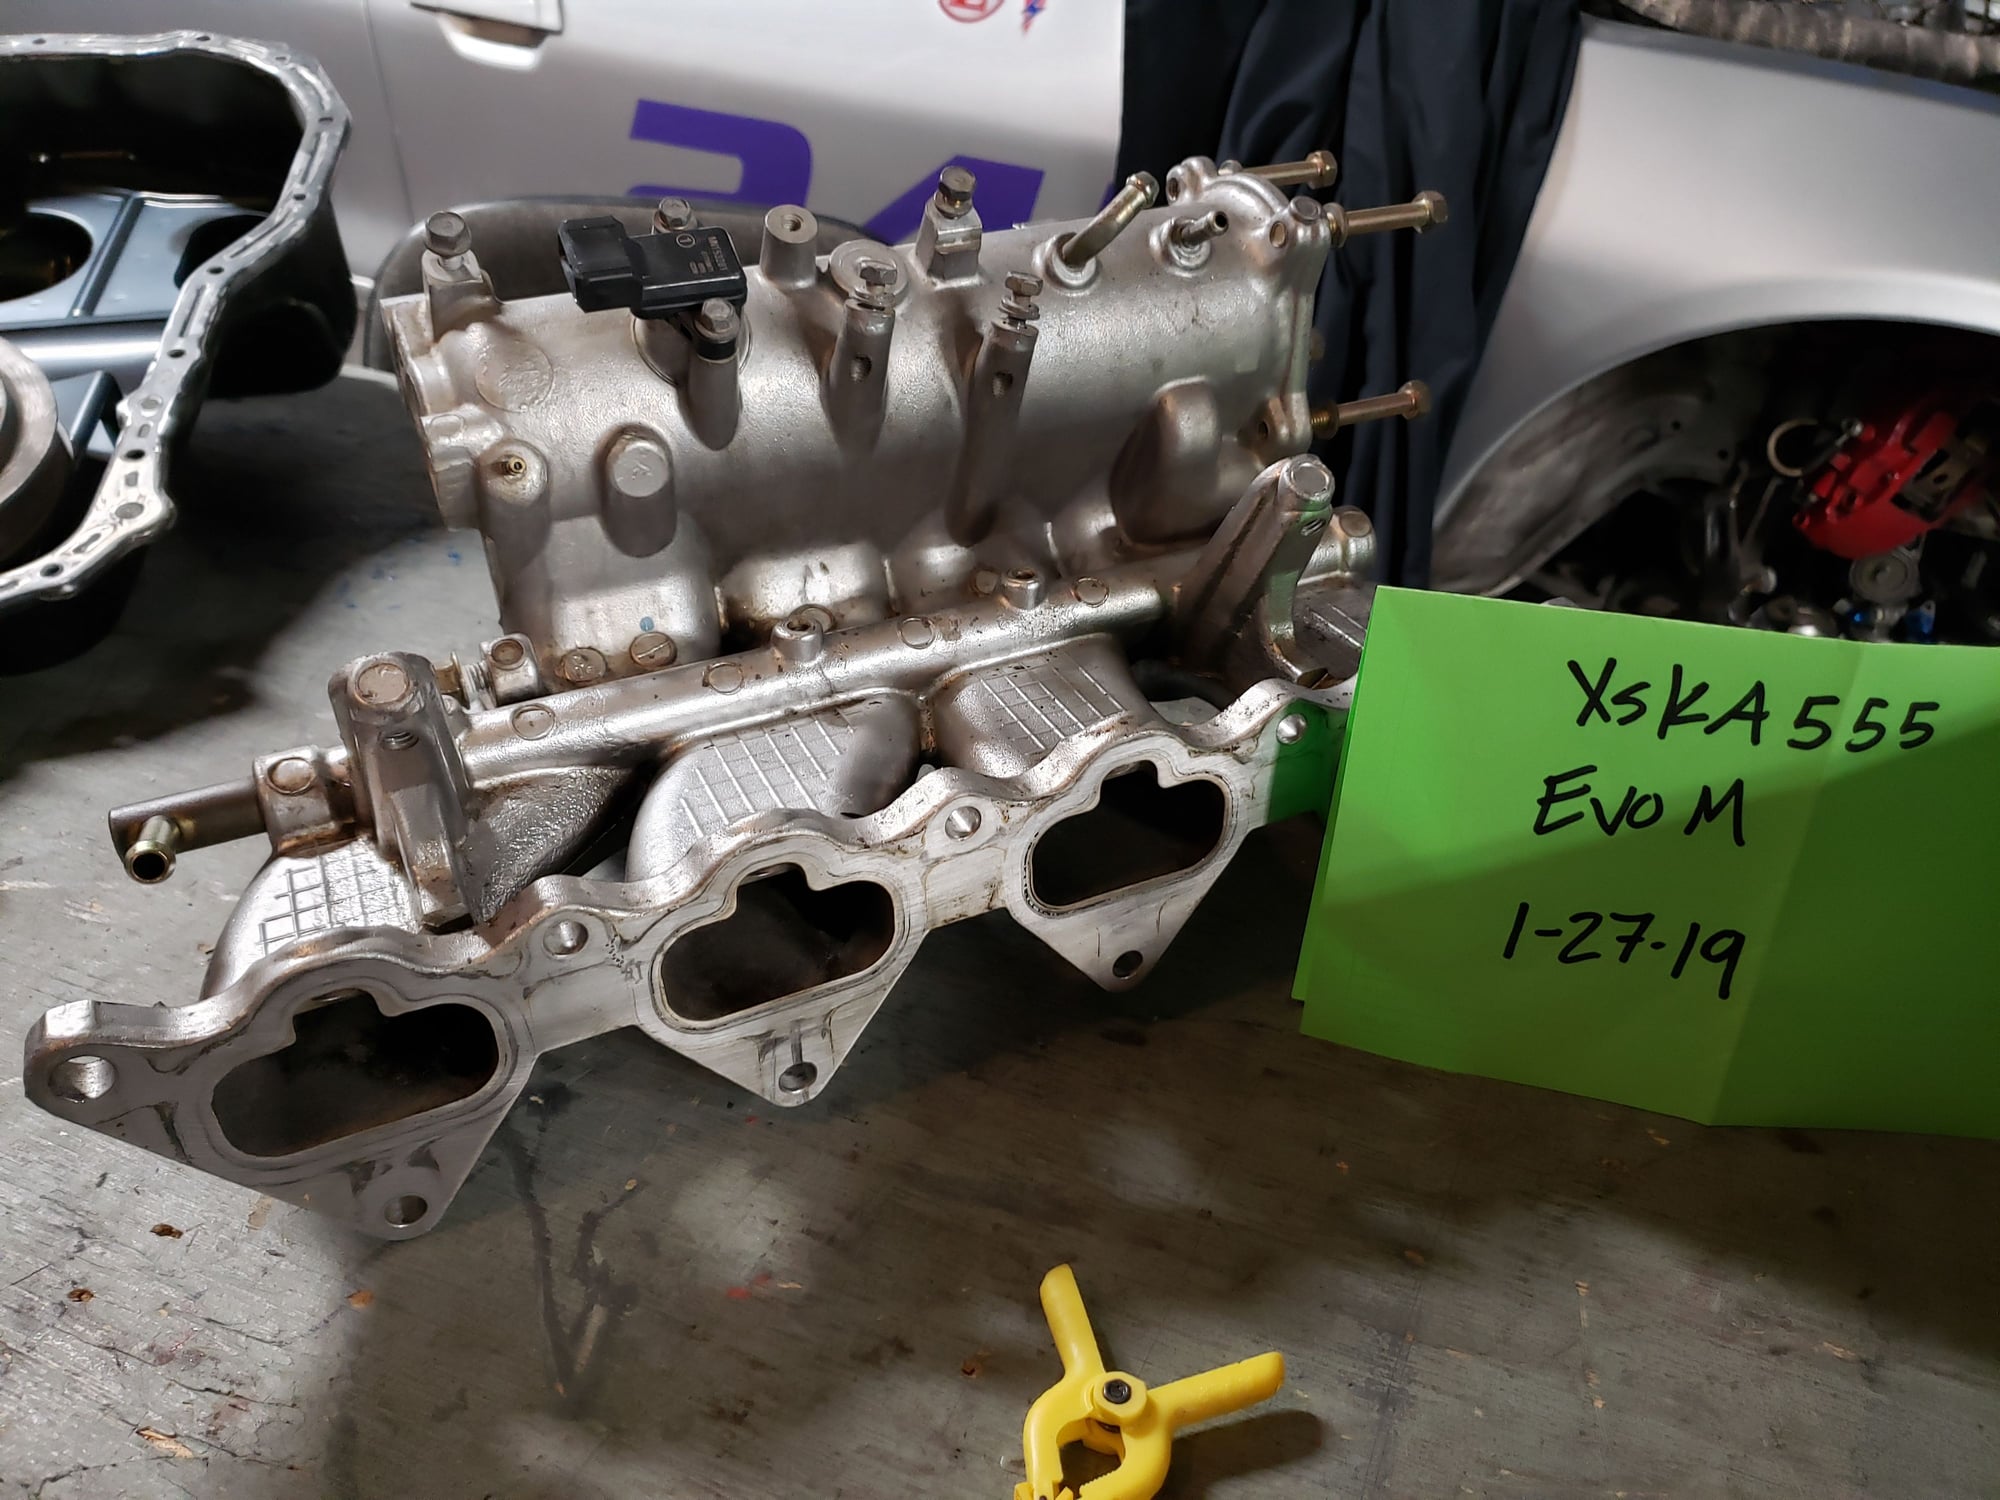 Engine - Intake/Fuel - Small Part Out - Used - 2003 to 2004 Mitsubishi Lancer Evolution - Silver Spring, MD 20905, United States